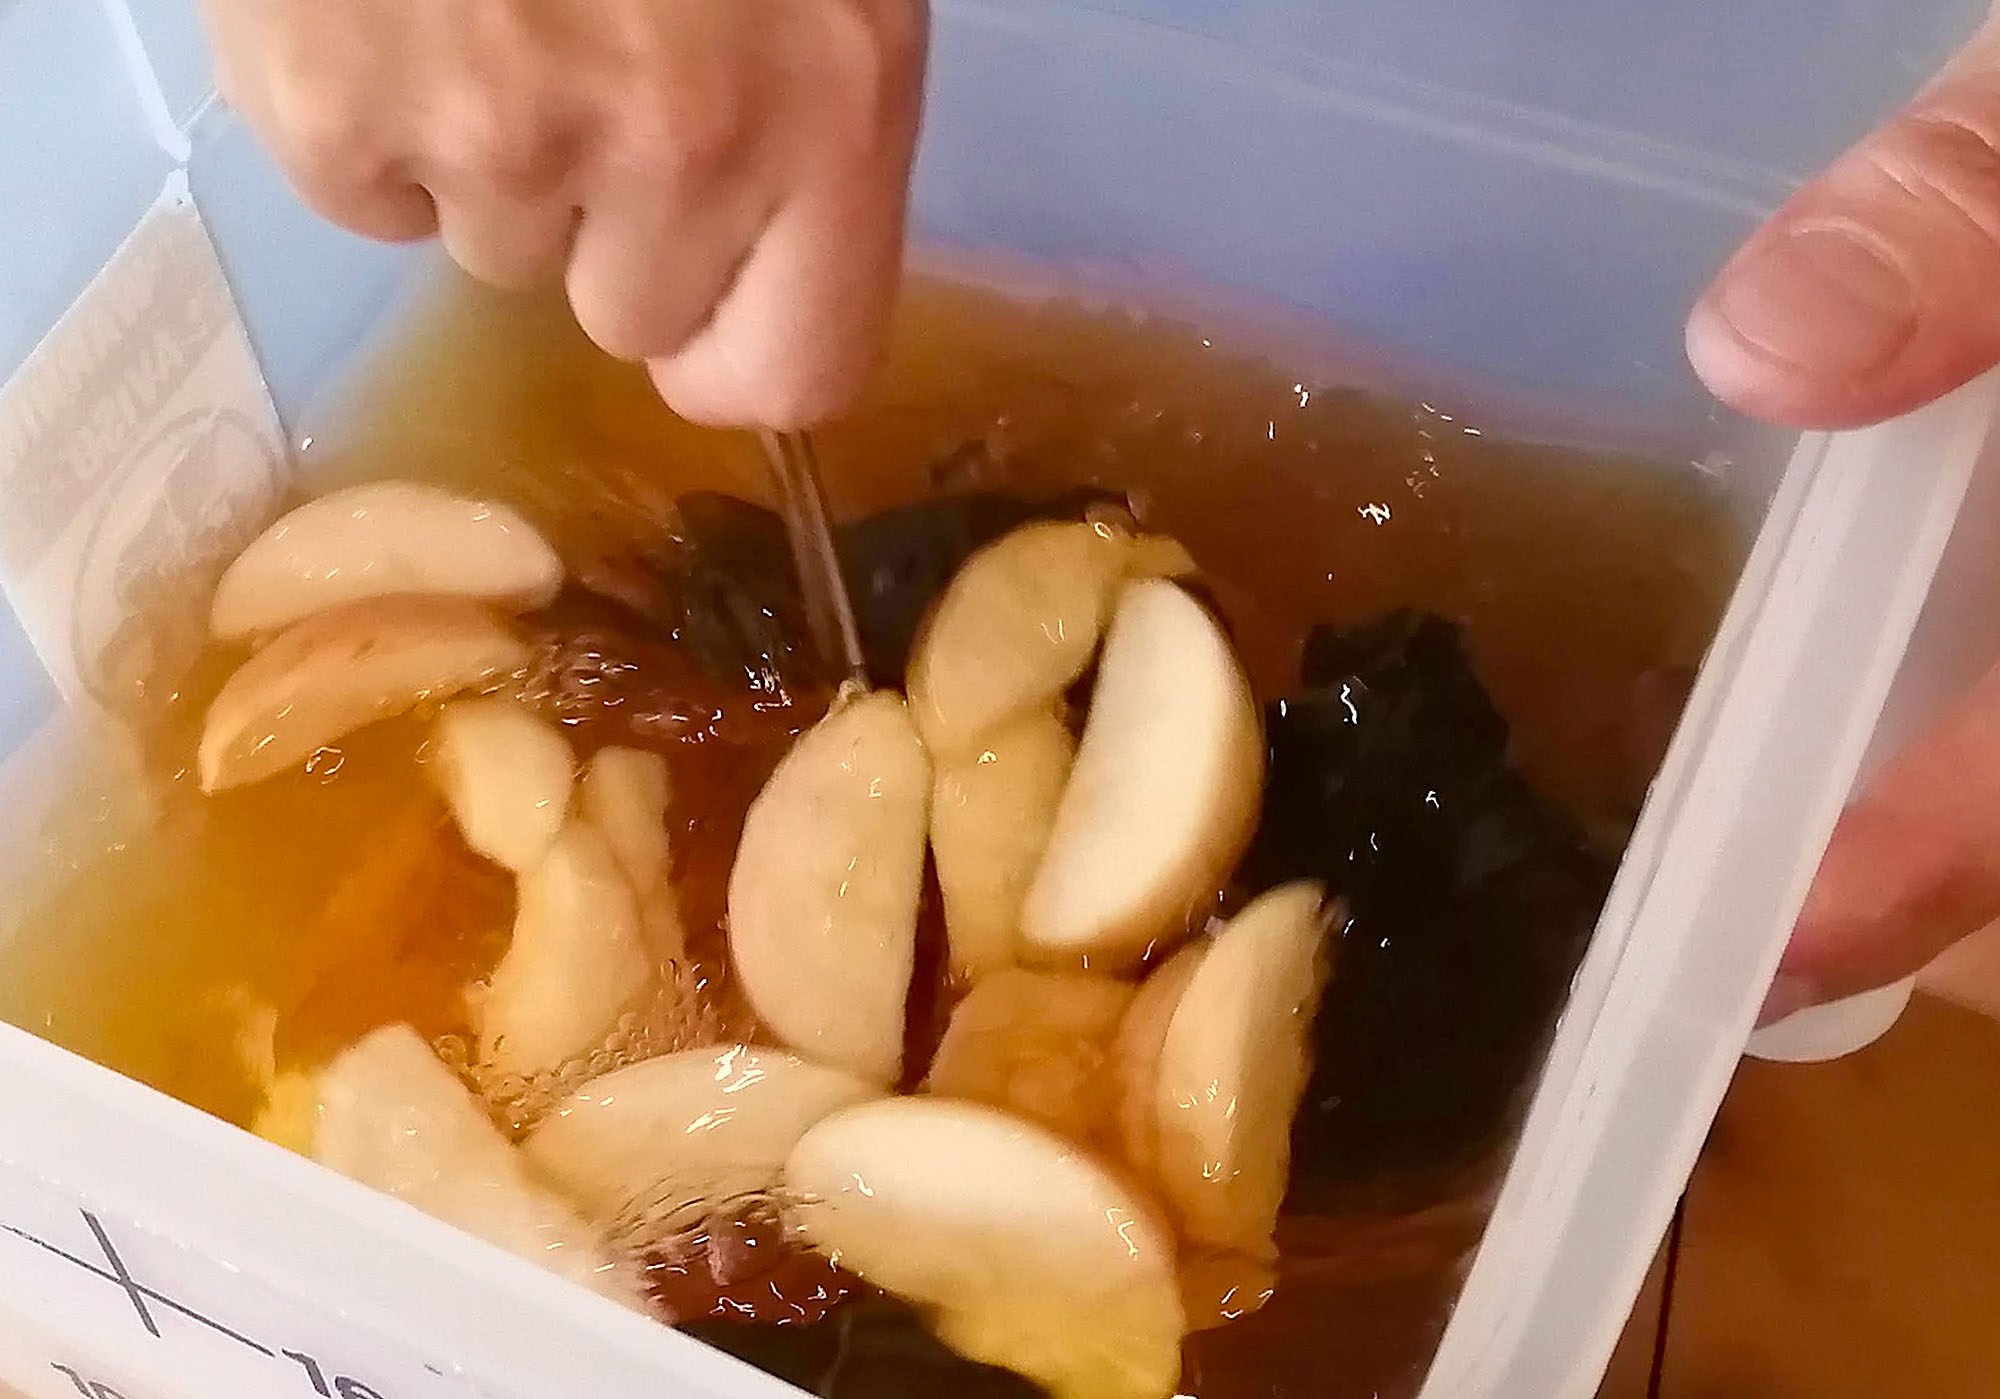 A close-up of a brown liquid in a white plastic bucket being stirred; slices of apple are clearly visible. Photo by Paul Young.